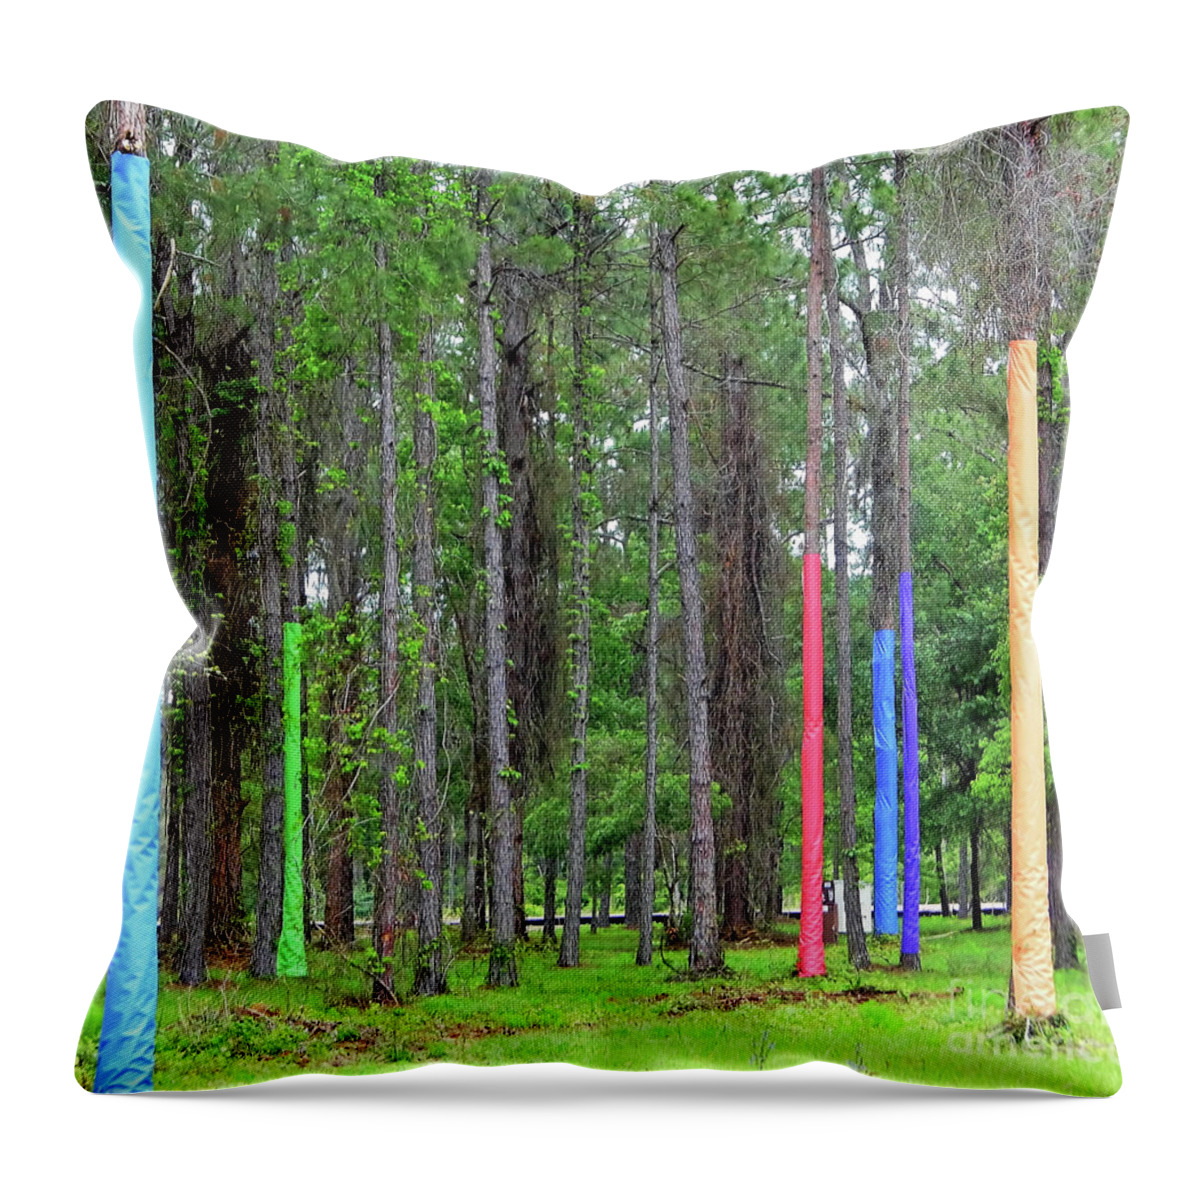 Pine Trees Throw Pillow featuring the photograph Pine Trees Wrapped In Color by D Hackett